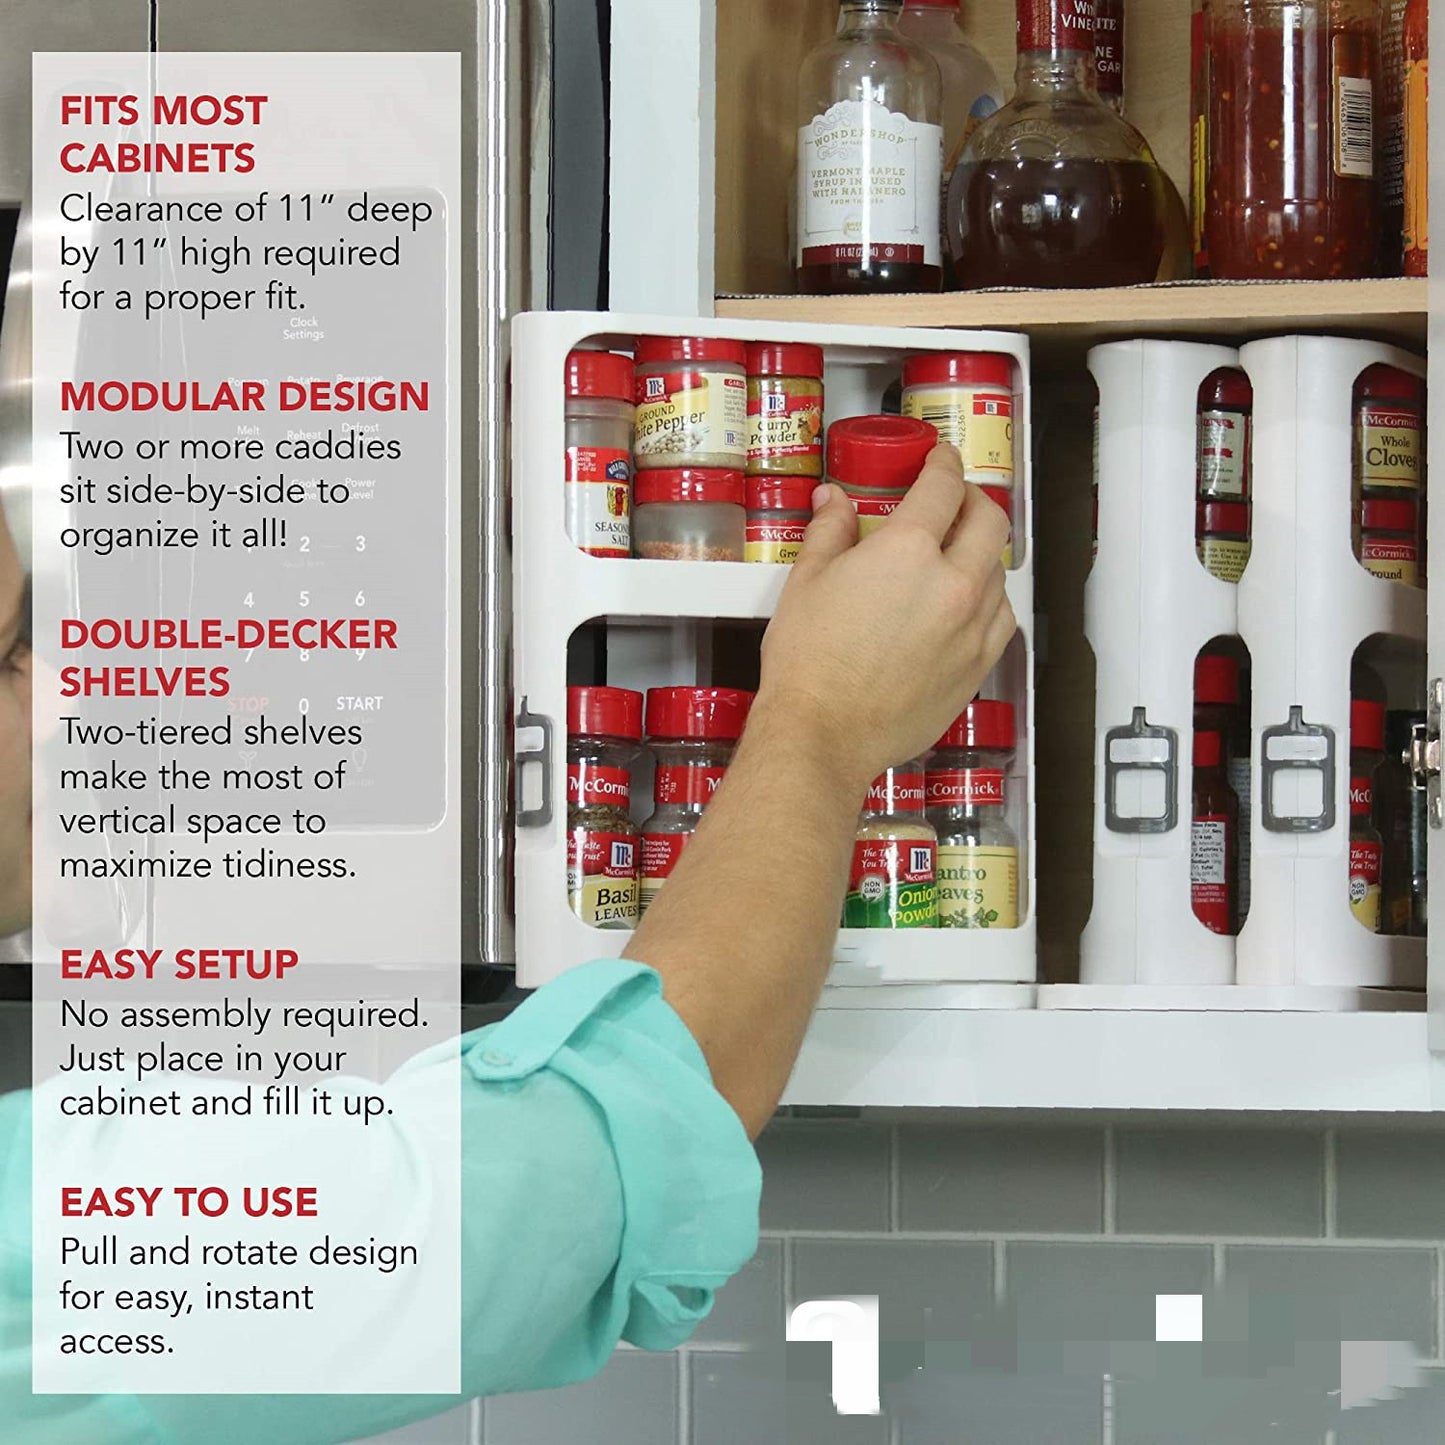 Rotating Double Tier Spice Rack